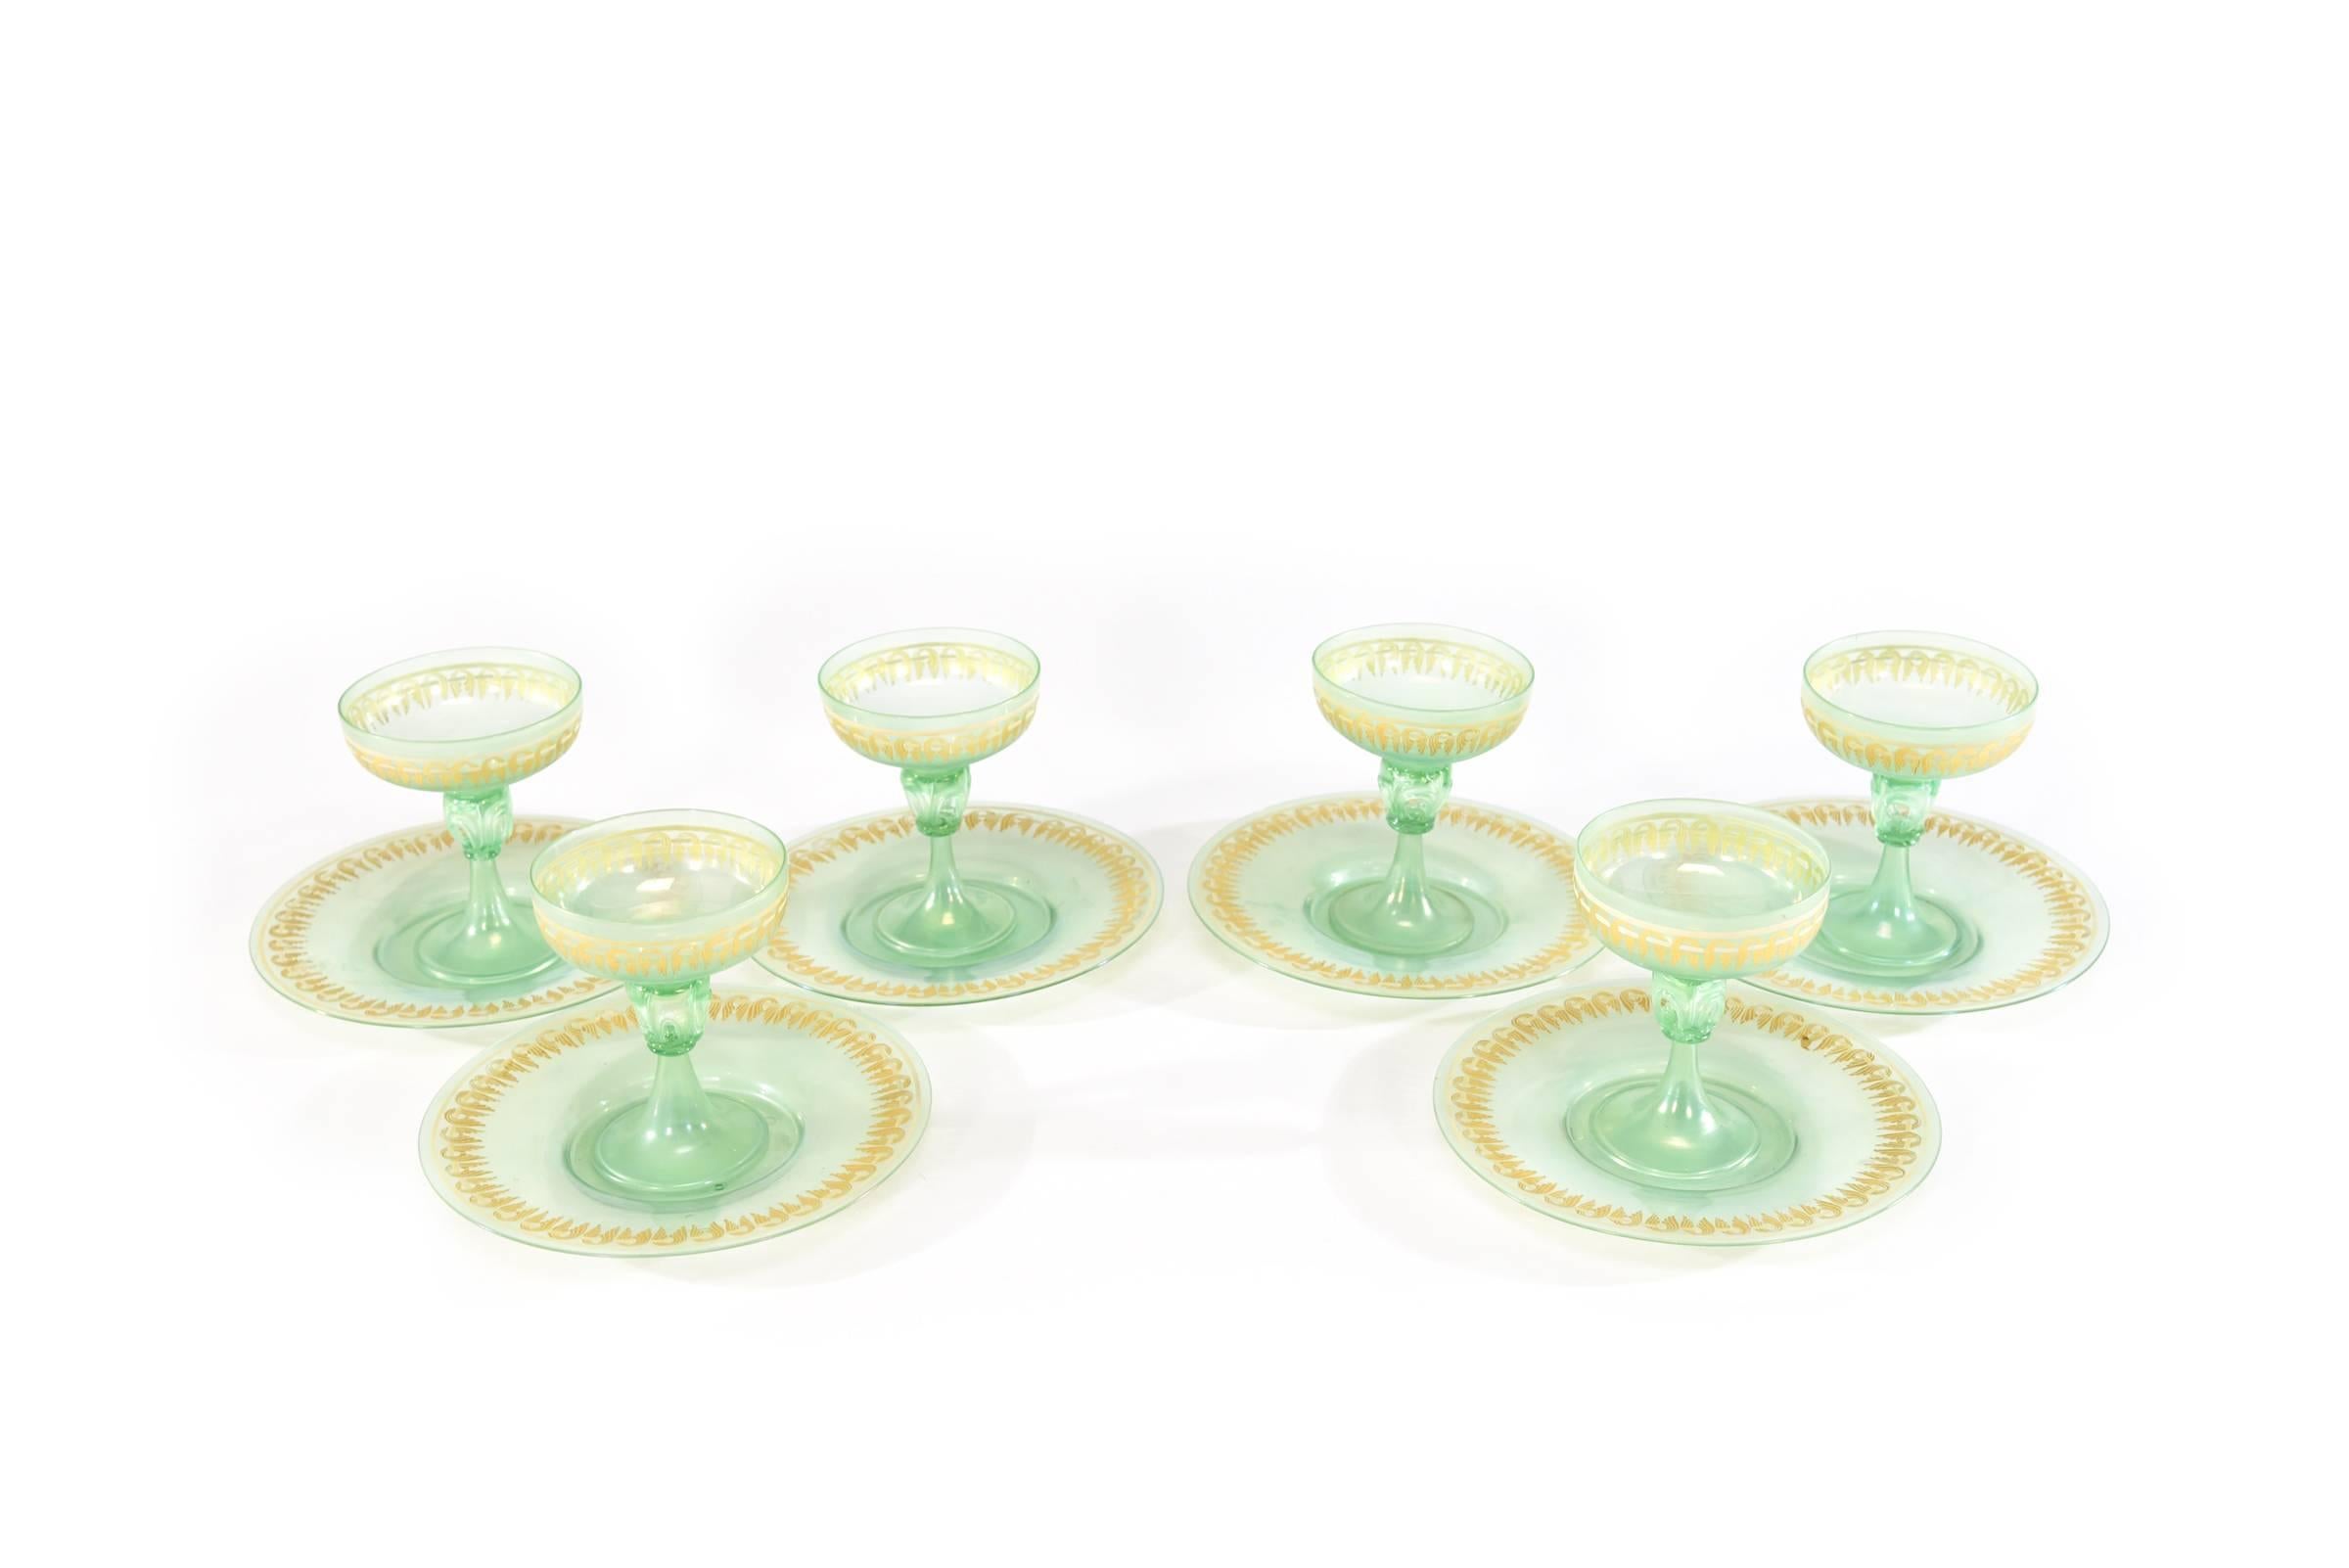 This set of 6 handblown Venetian compotes are shaped with an elegant profile and decorated in soft green with gold highlights. The matching under plate make for a lovely presentation and very versatile. First course, intermezzo and wonderful for